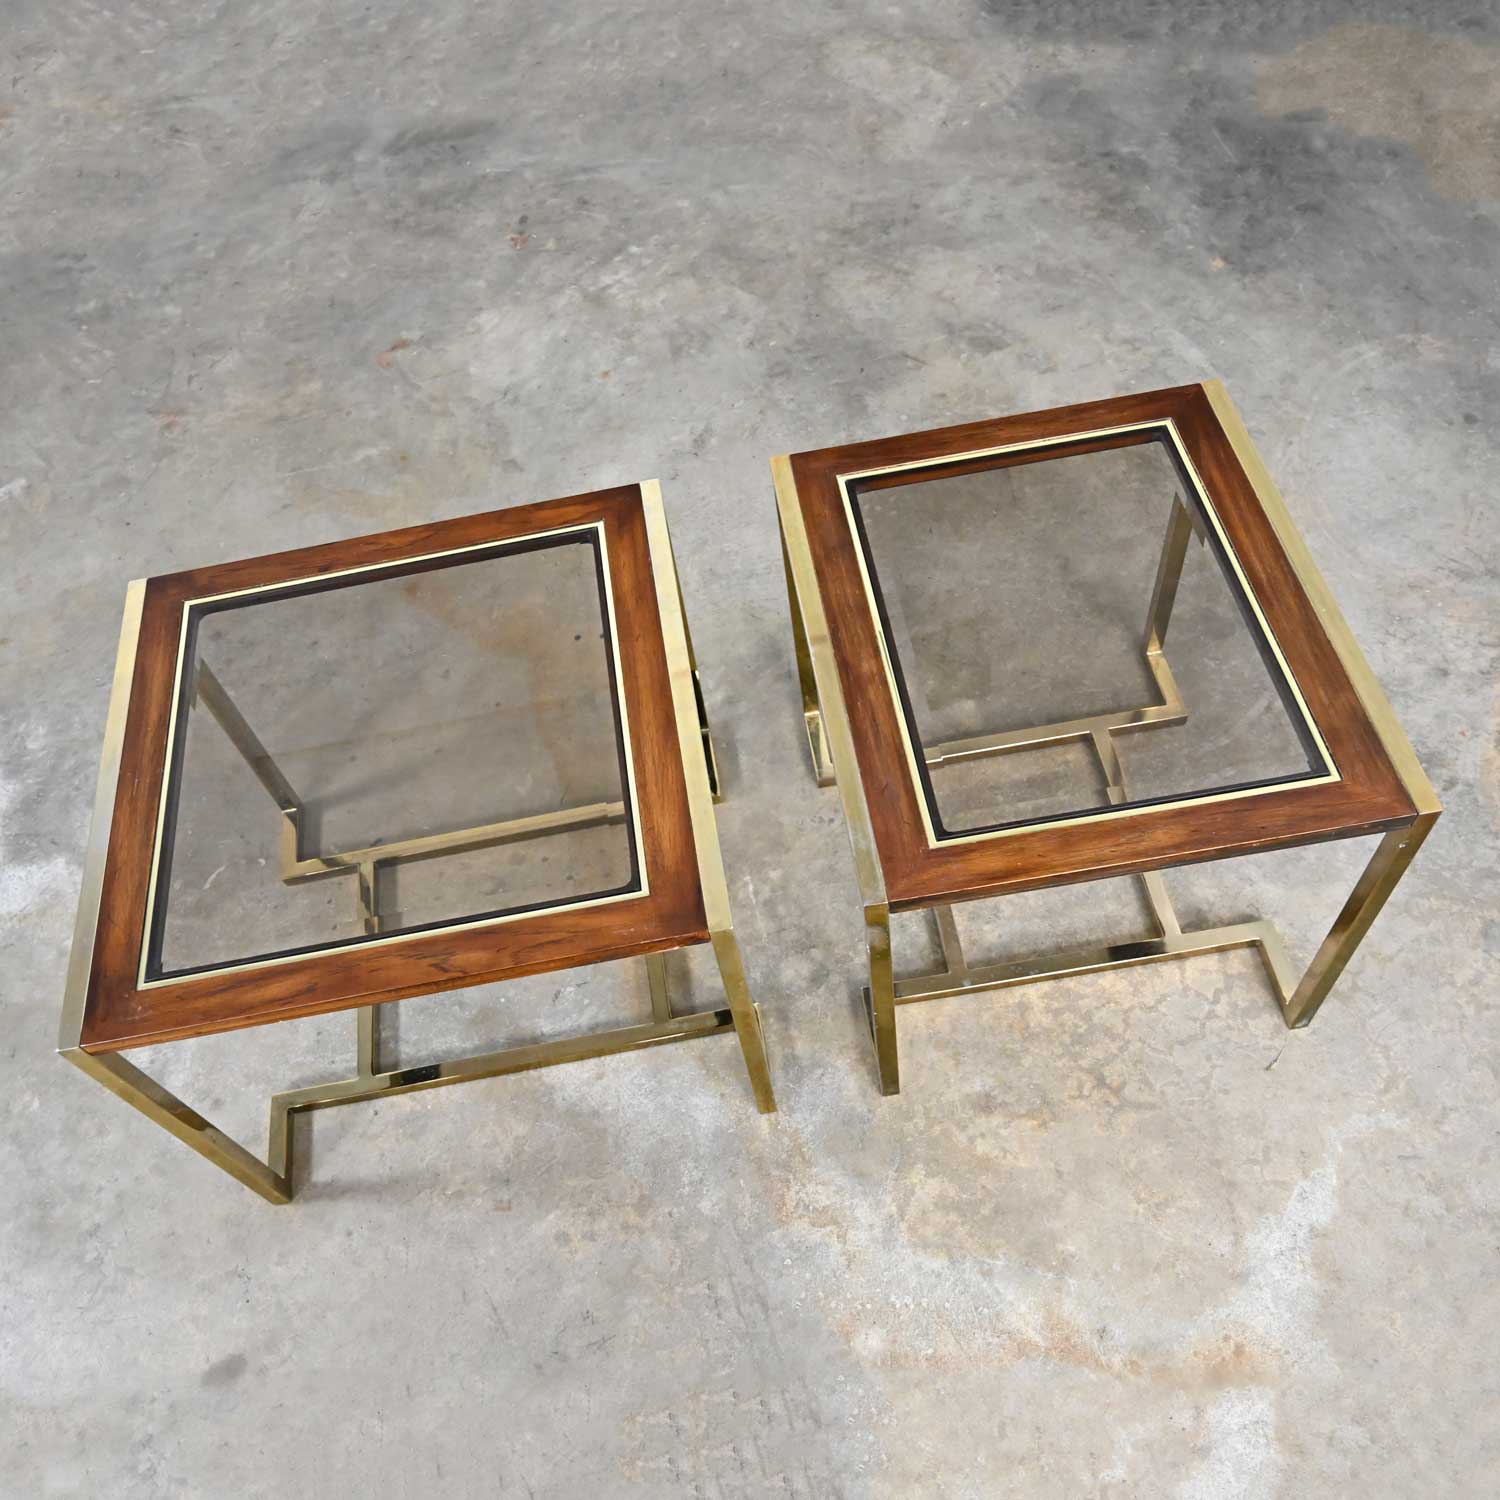 Pair of Modern Brass Plated Dark Wood & Smoked Glass Rectangle End Tables 2 Sizes by Thomasville Furniture Ind., Style of Milo Baughman